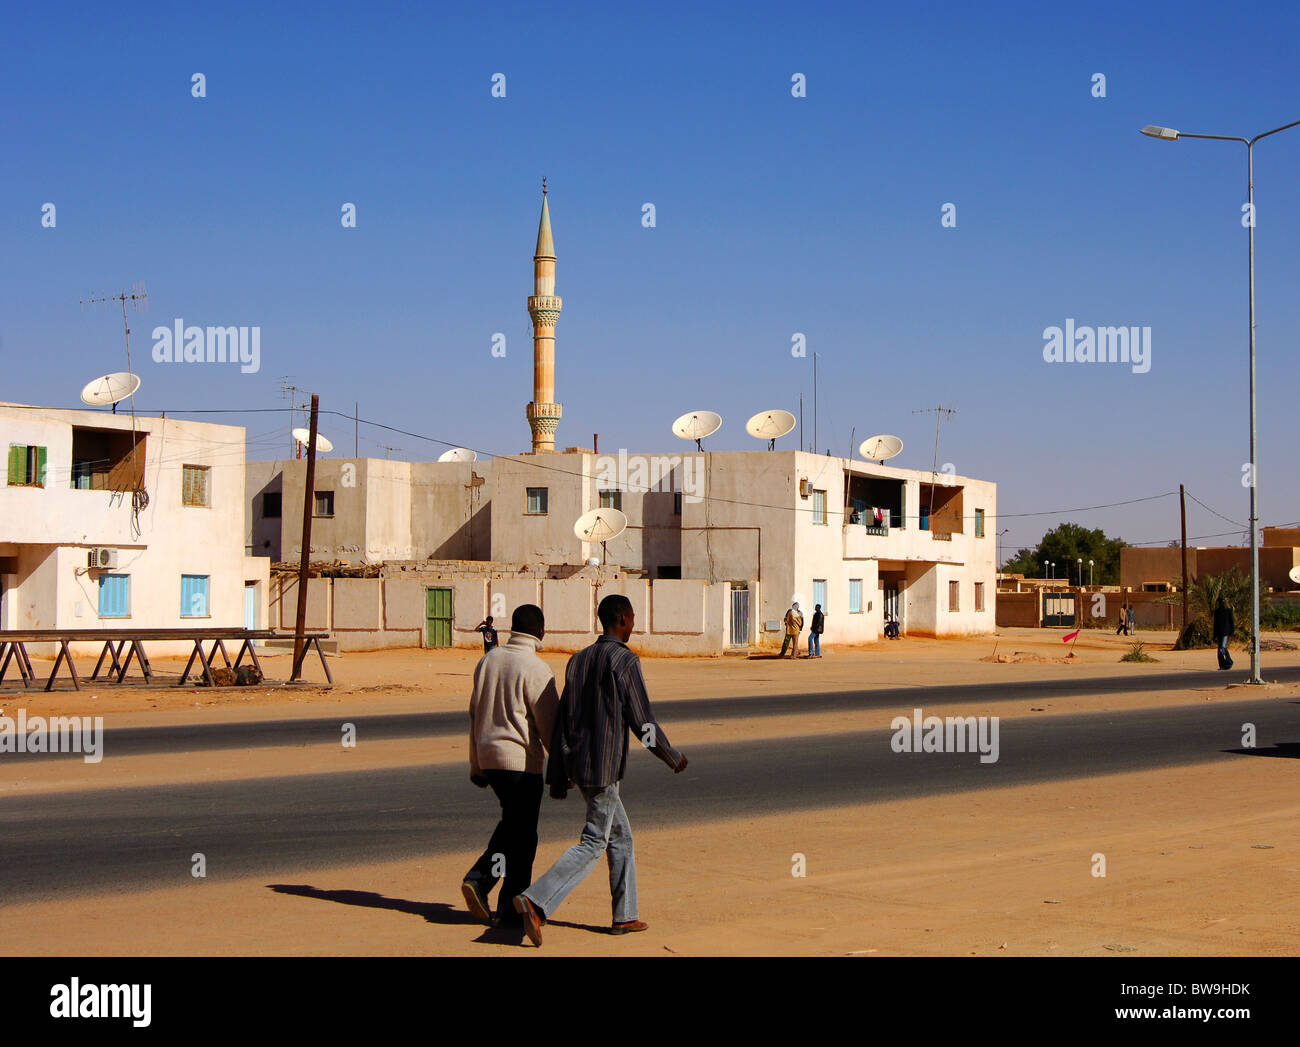 Residential houses with satellite dishes on the roof and the minaret of a mosque in the town of Jerma, Libya Stock Photo